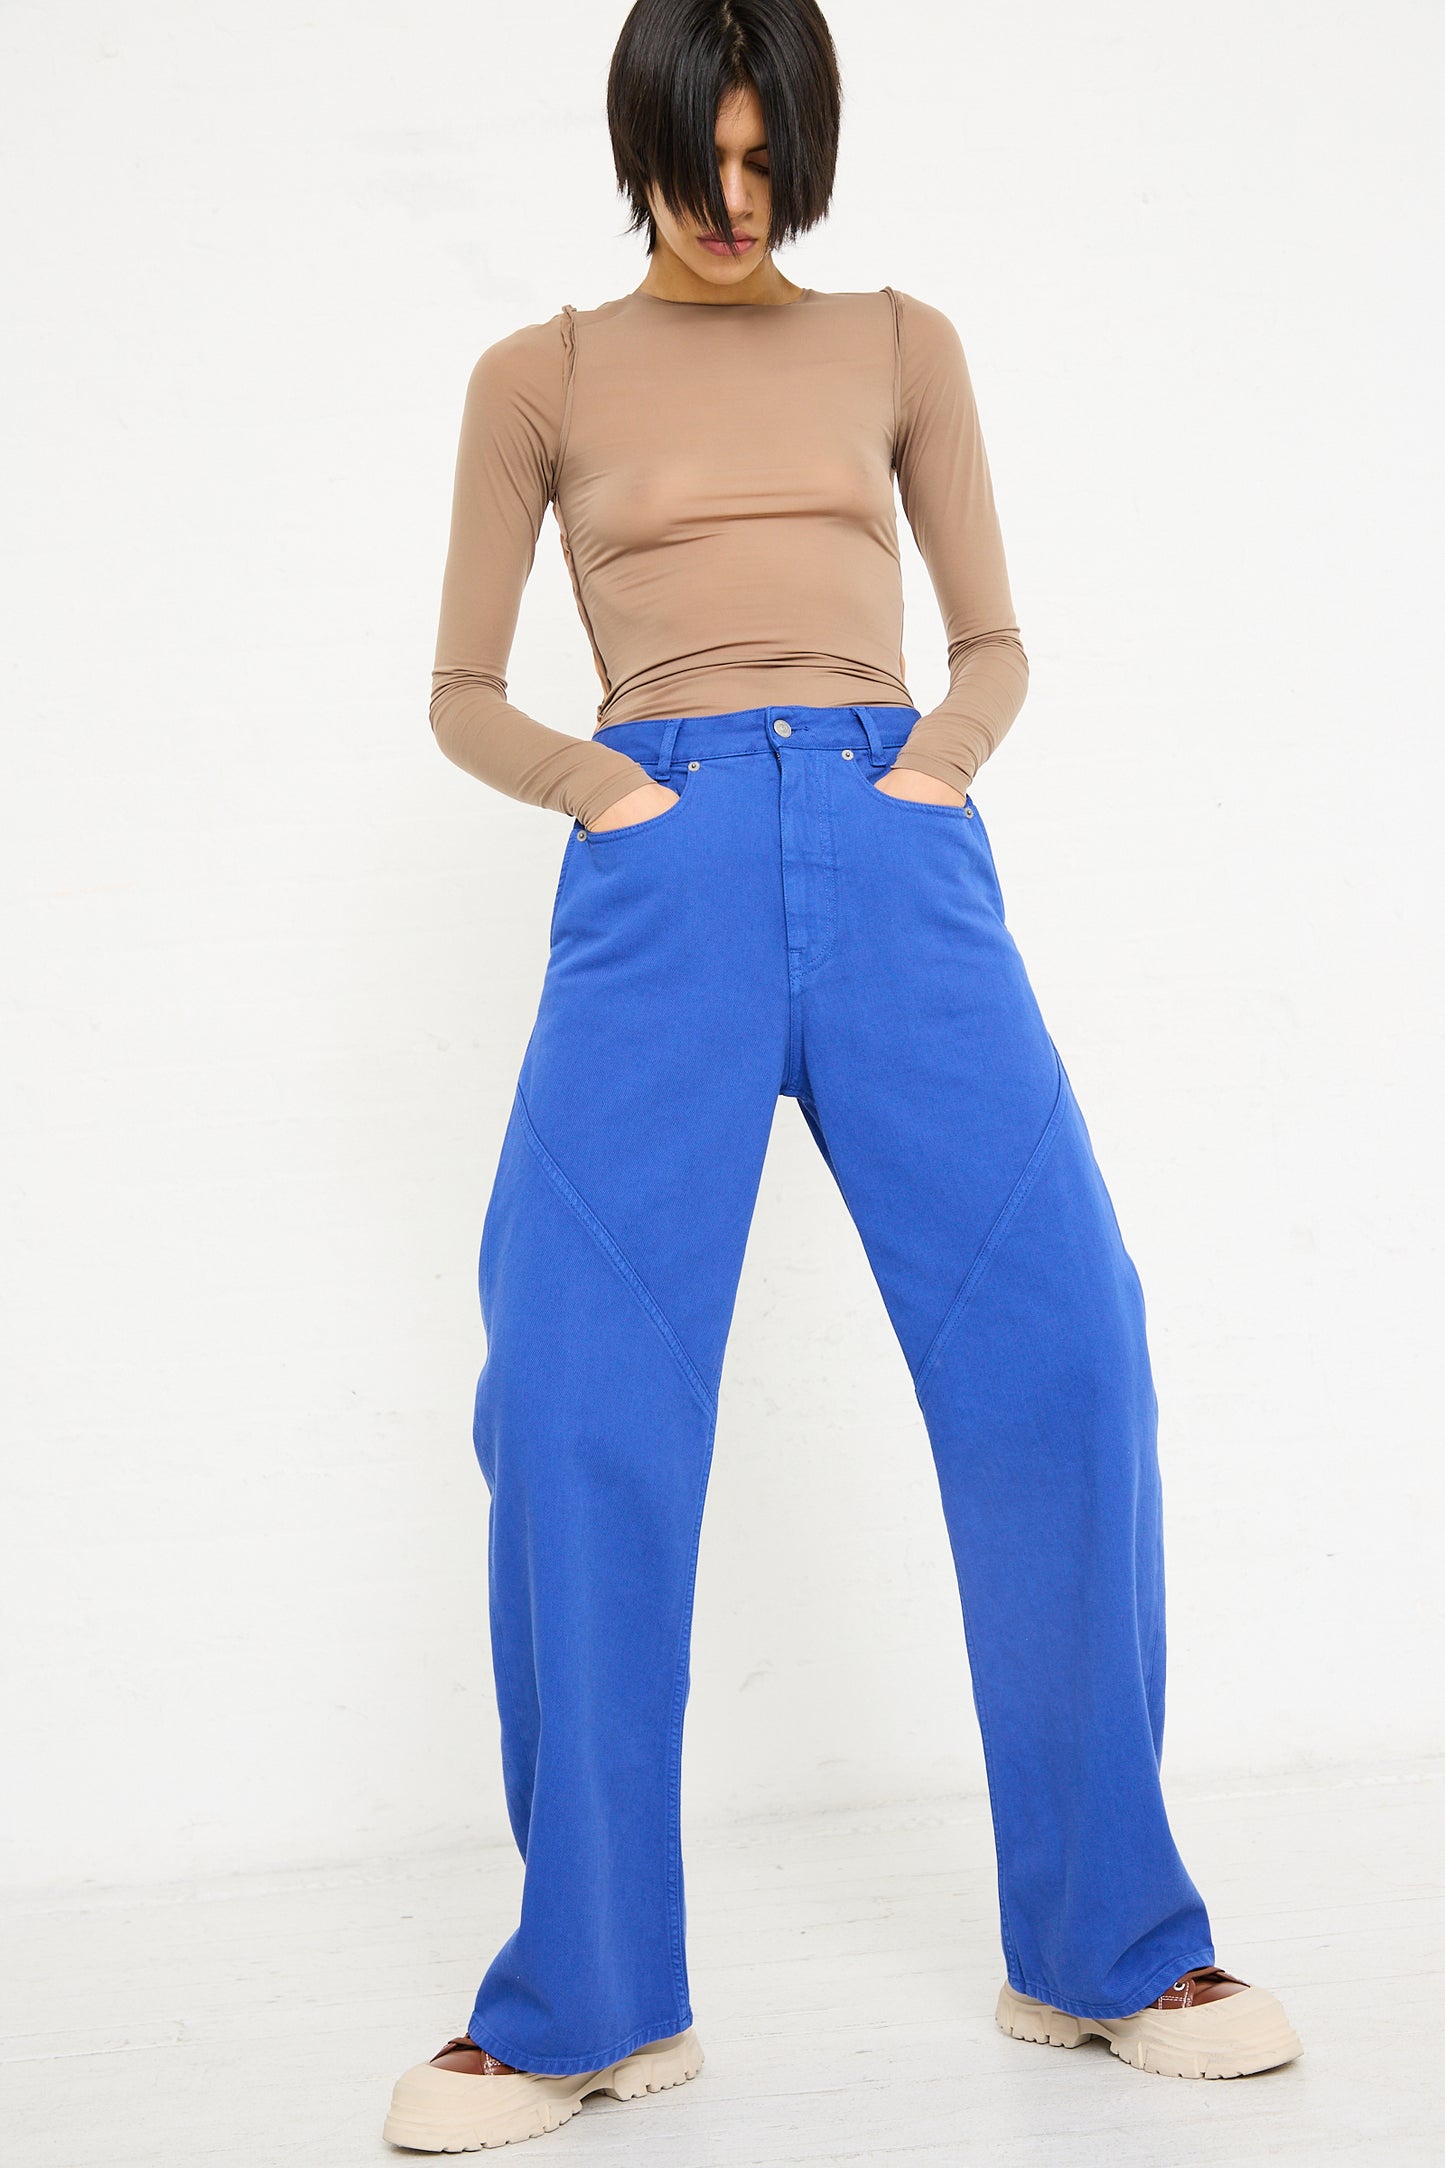 Woman standing in a studio, wearing a tan top and blue MM6 5 Pocket Pant high-waisted trousers, with her hands in pockets.